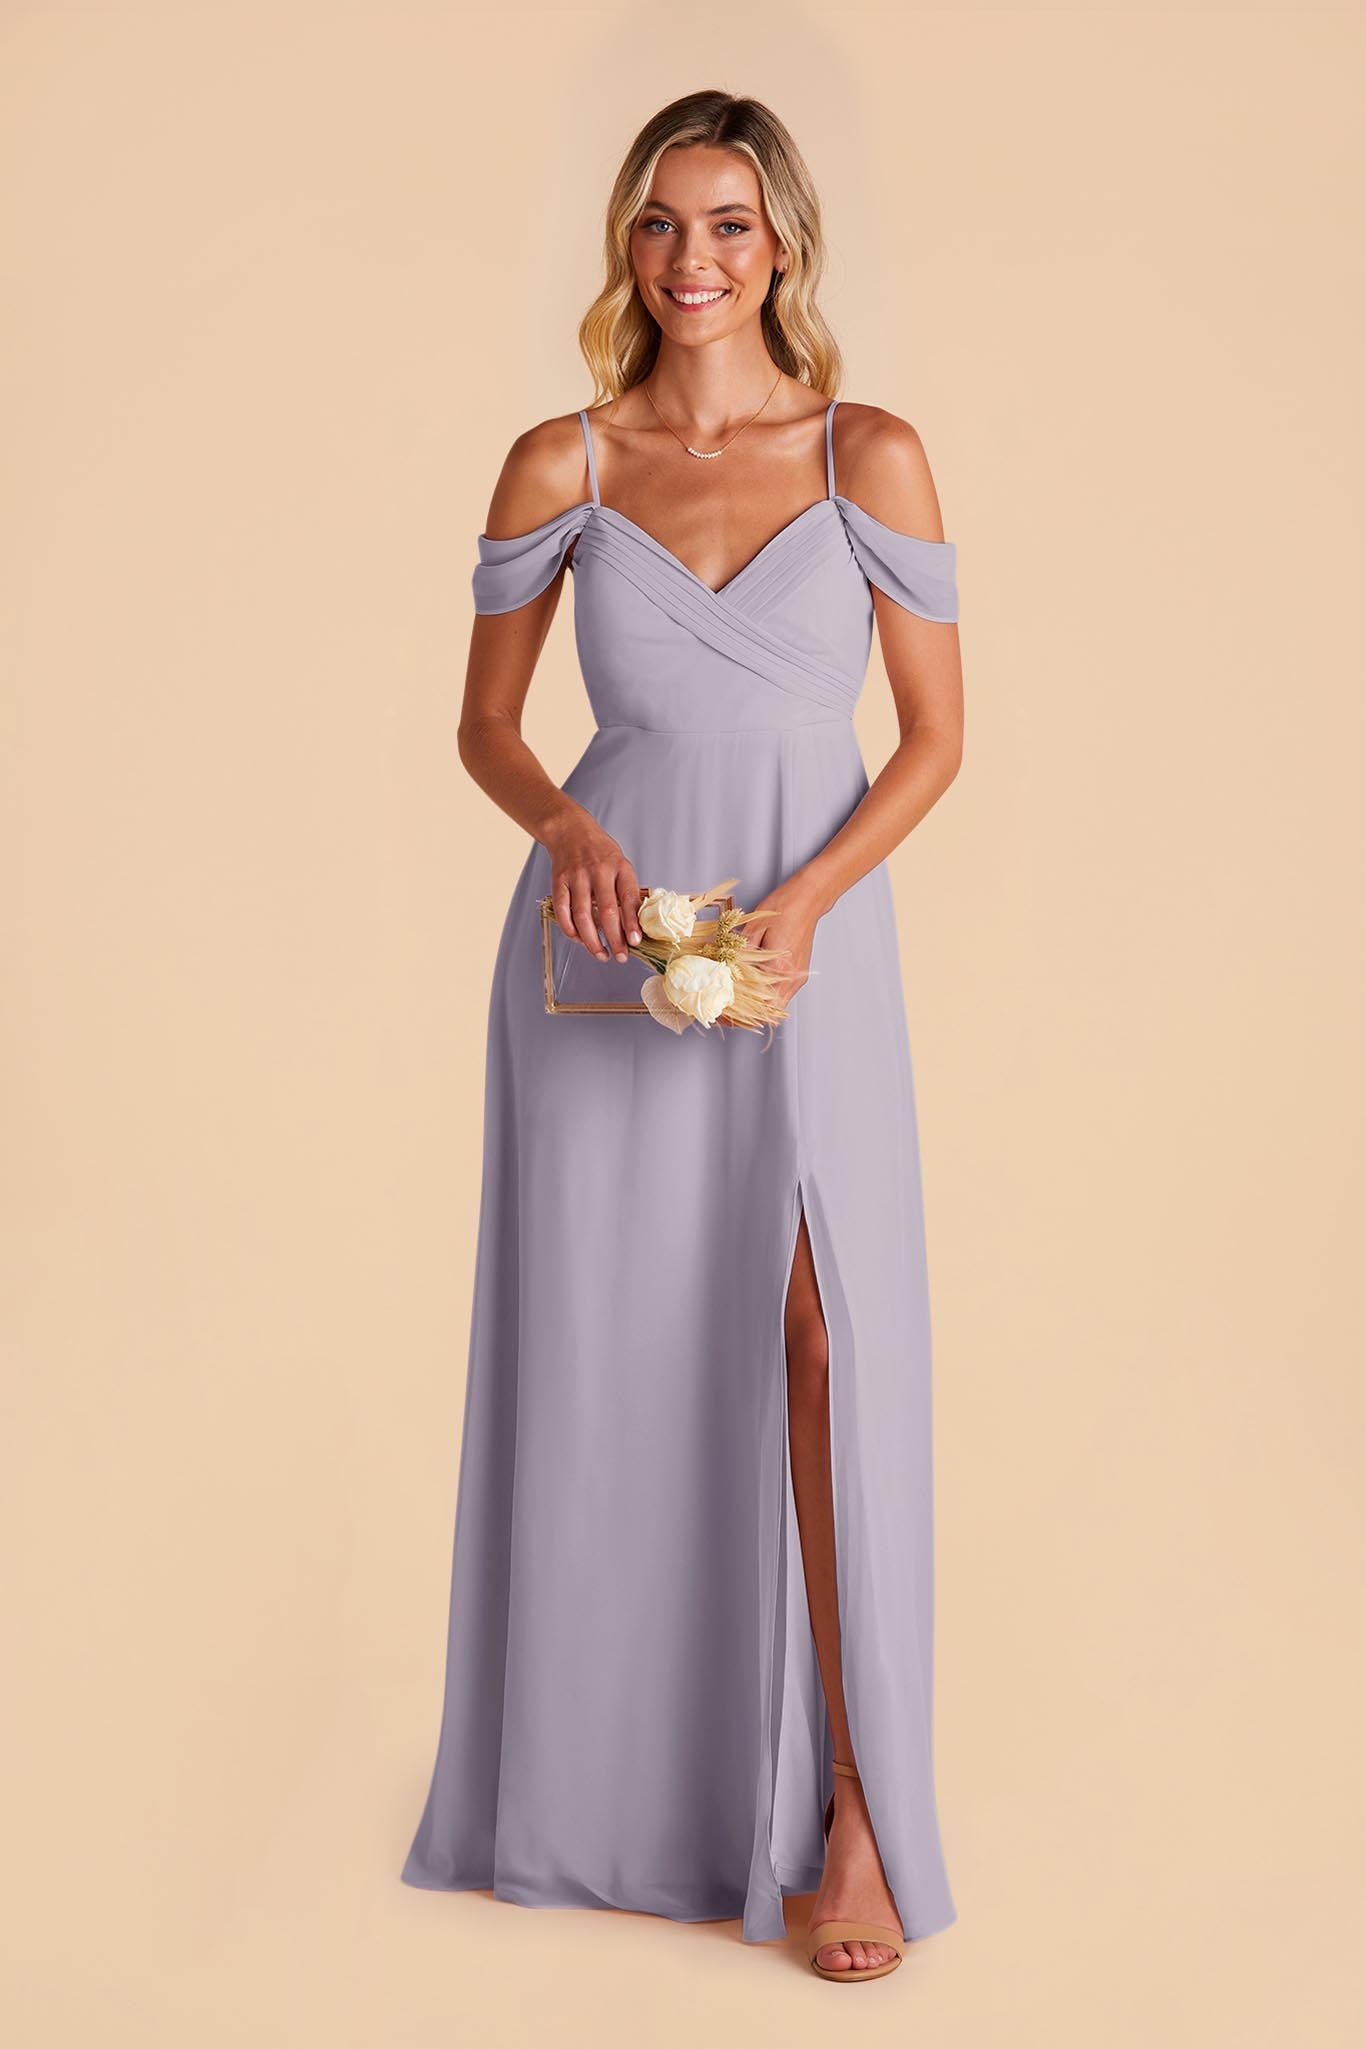 Dusty Lilac Spence Convertible Dress by Birdy Grey